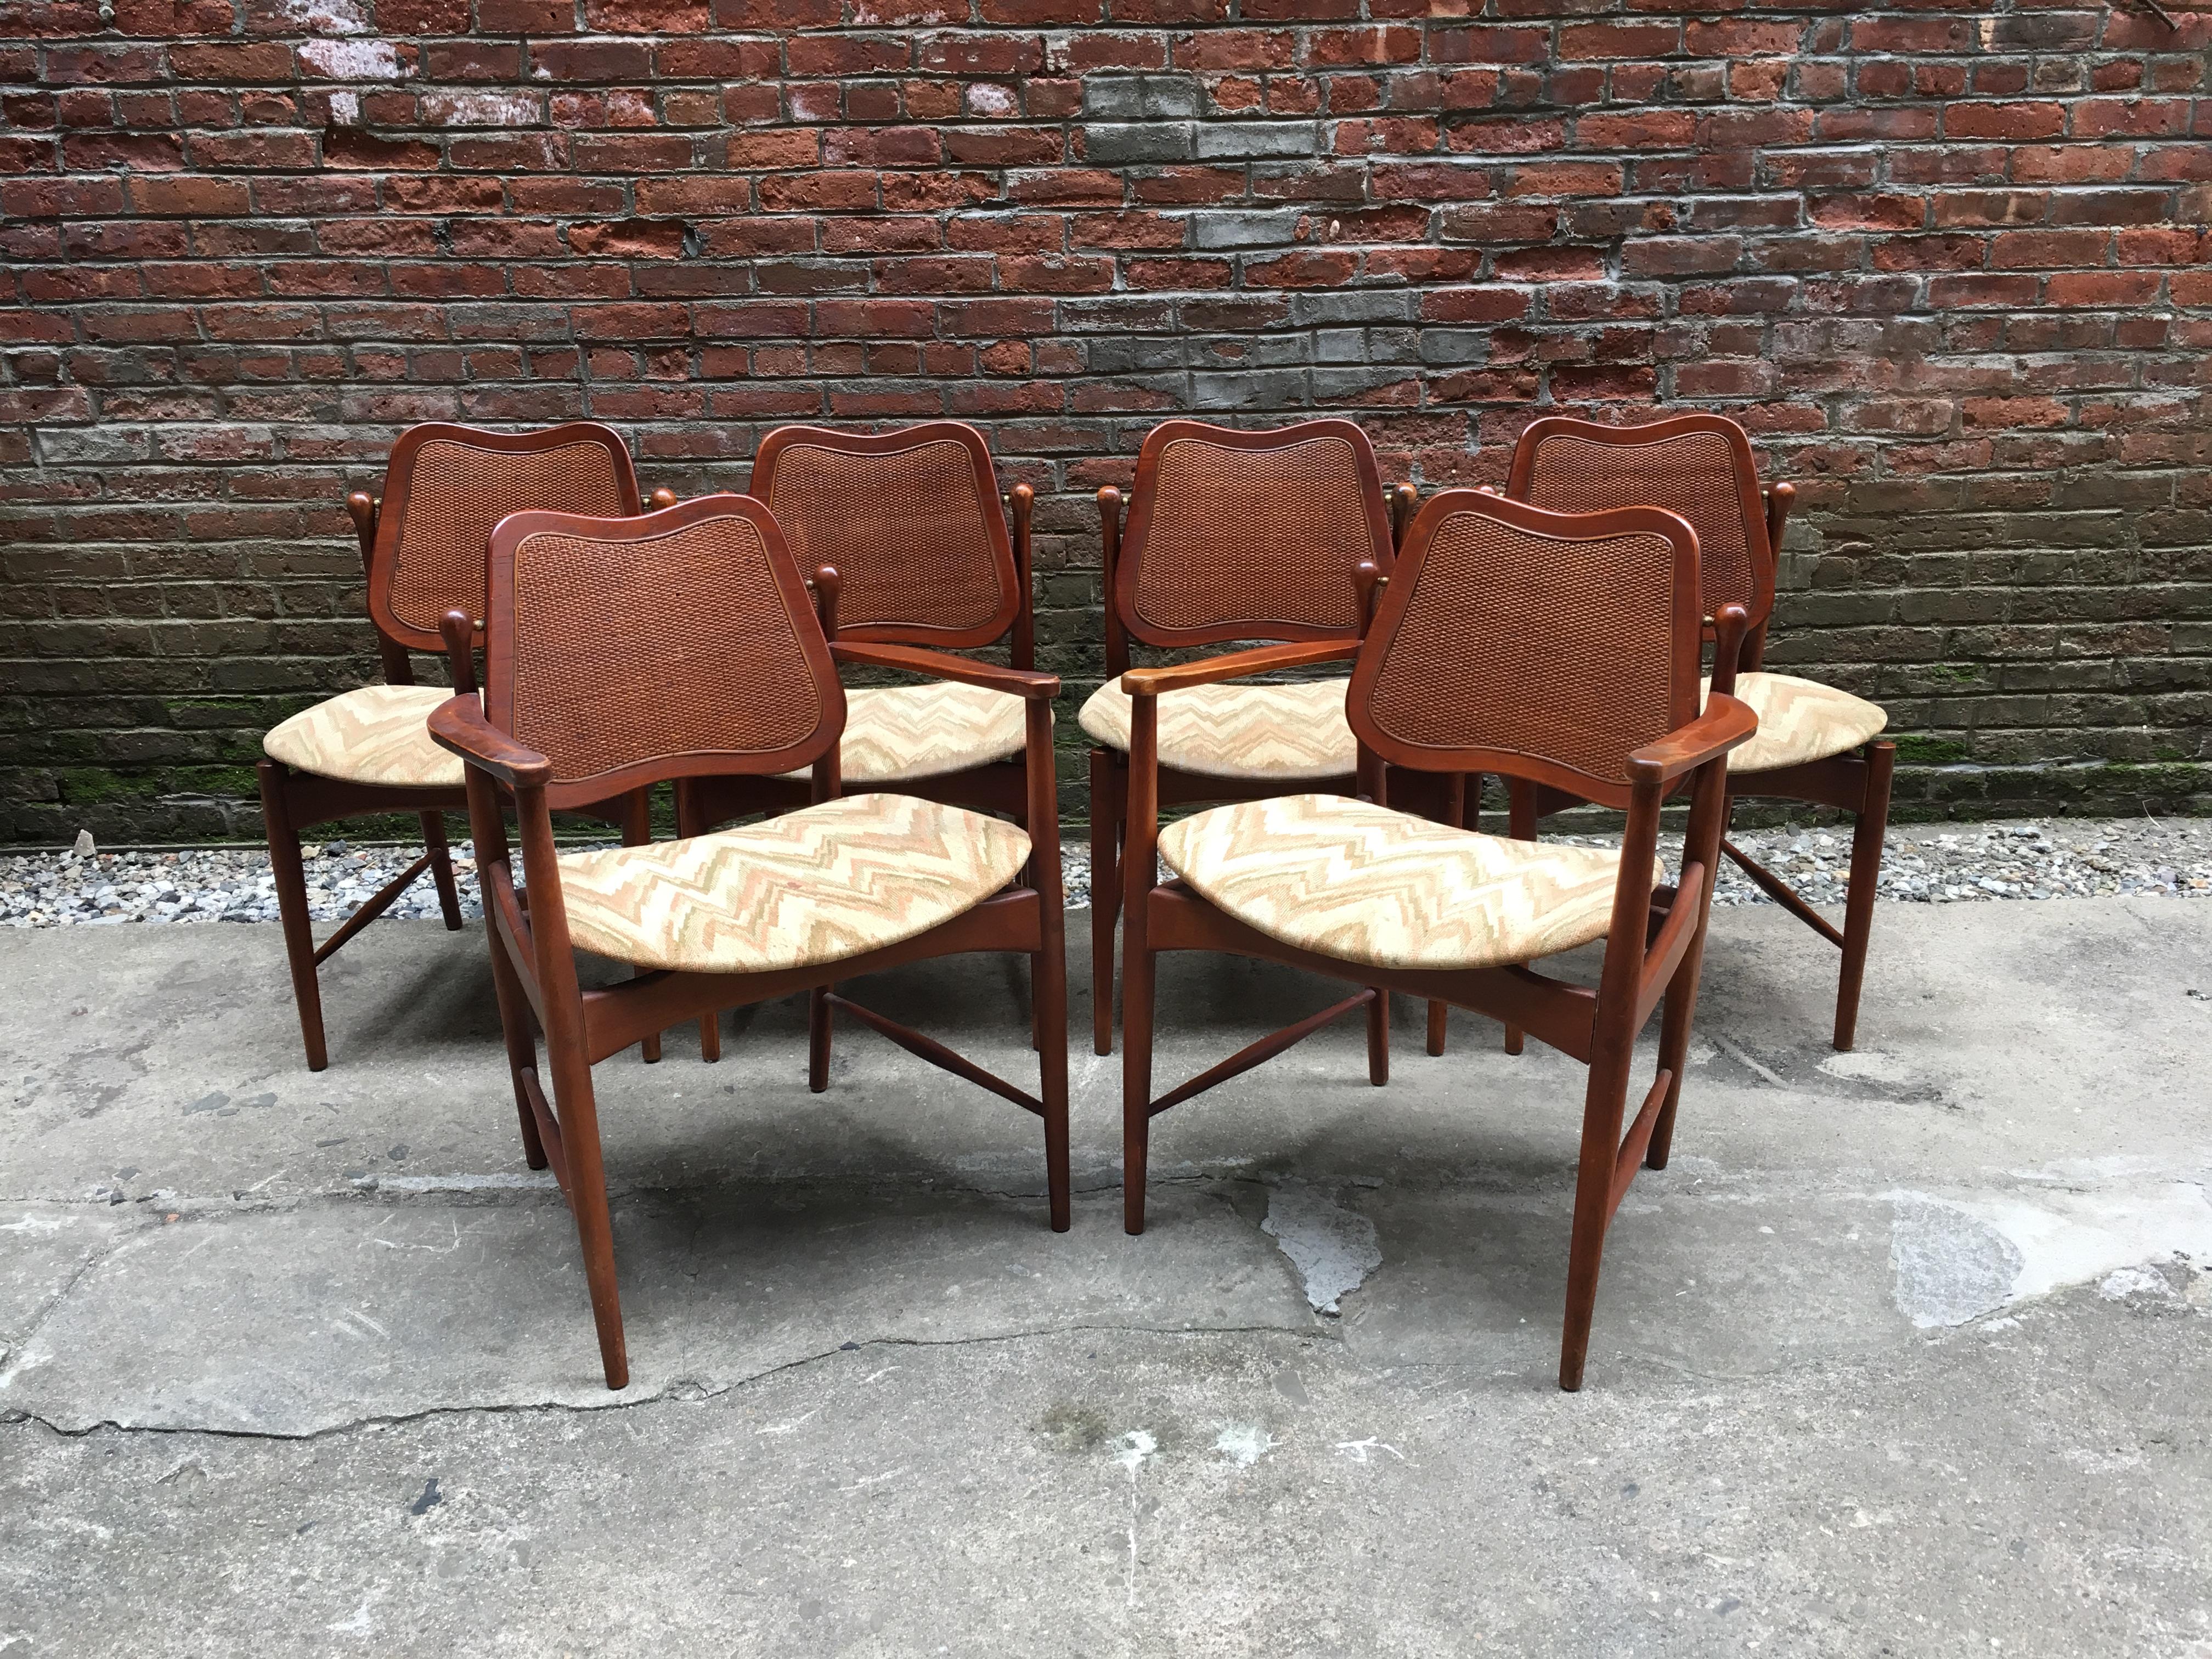 Early and good set of six Danish modern Arne Vodder designed teak and cane back chairs. These beautiful chairs feature solid teak construction, inset caned backs, and brass fittings so the back of the seat tilts when you move for constant back